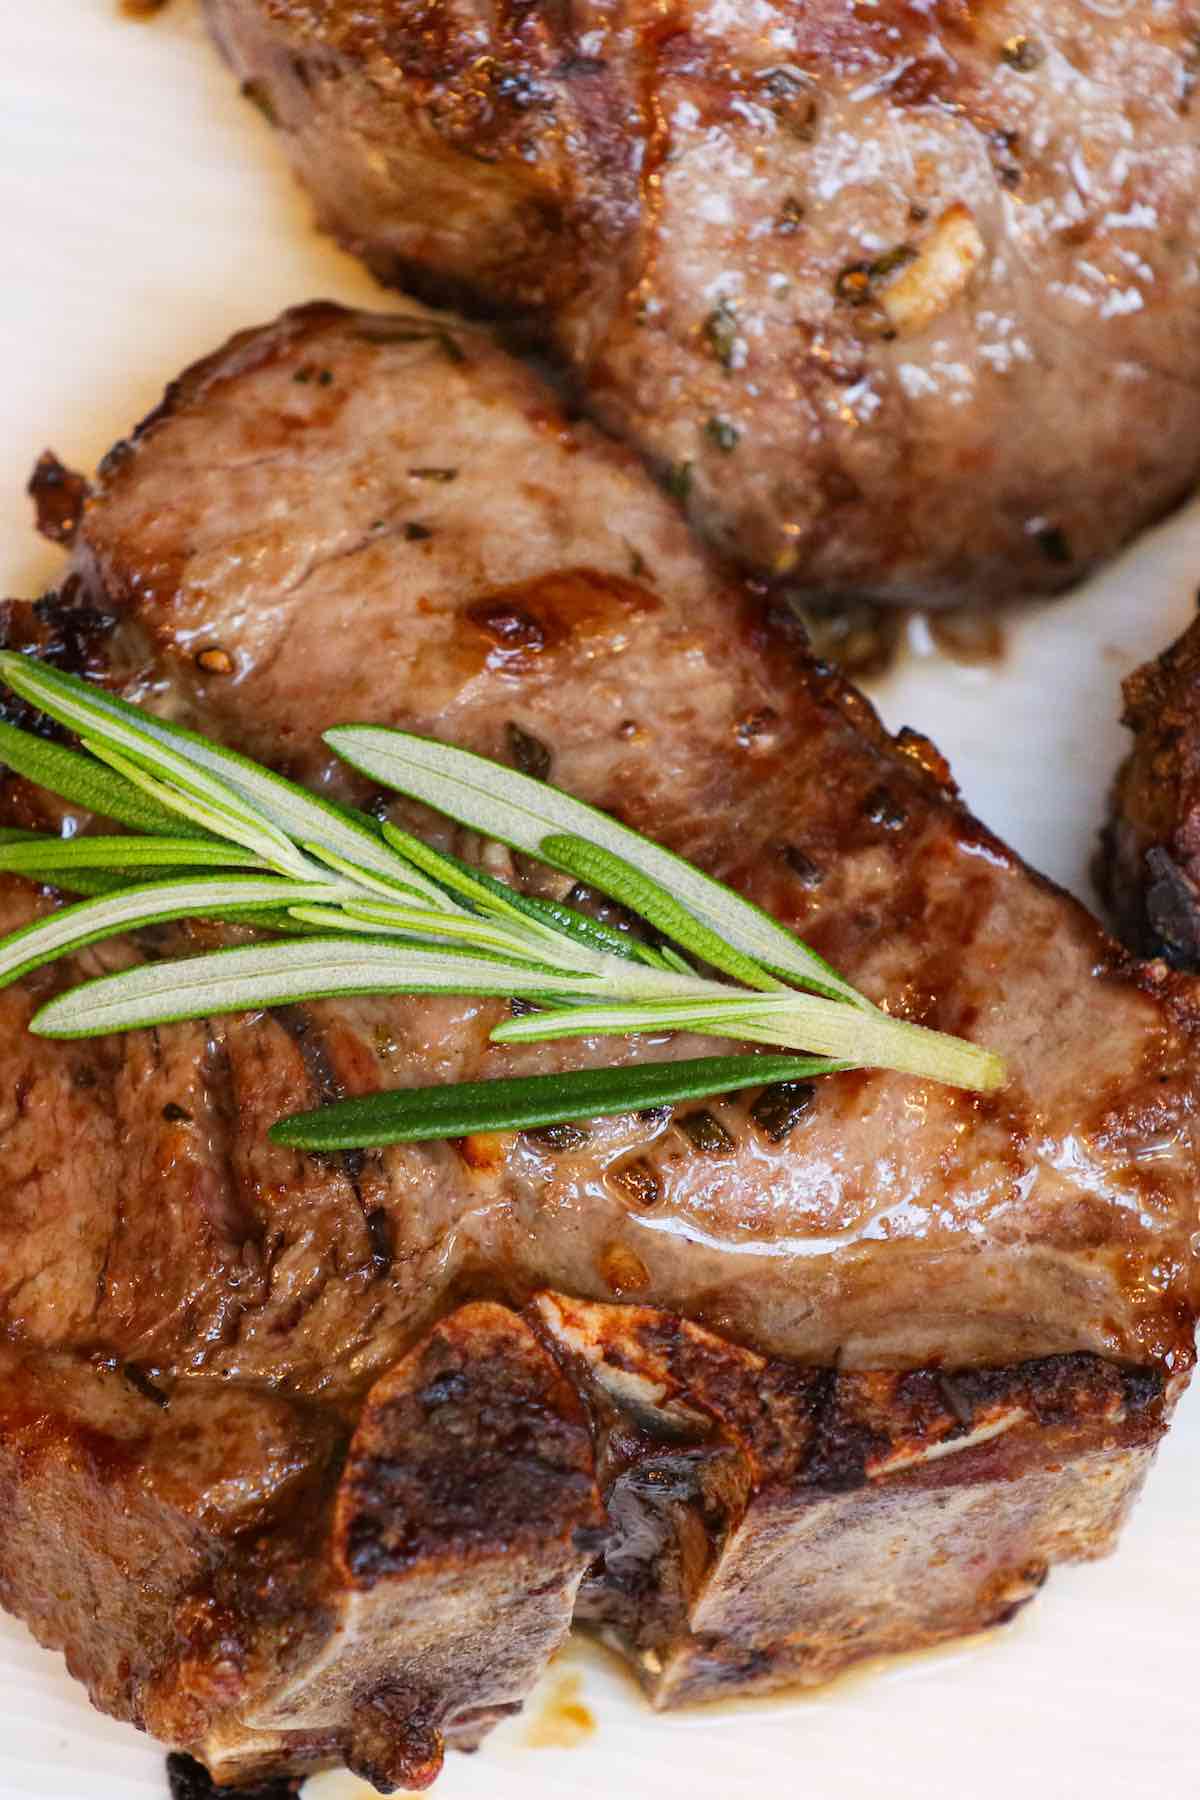 These Air Fryer Lamb Chops are juicy and flavorful with a crispy crust. This easy recipe is the fastest way to cook lamb chops, cutlets or a rack of lamb. They marinate briefly in garlic, rosemary and olive oil before cooking for just 10-12 minutes at 400°F! #AirFryerLambChops